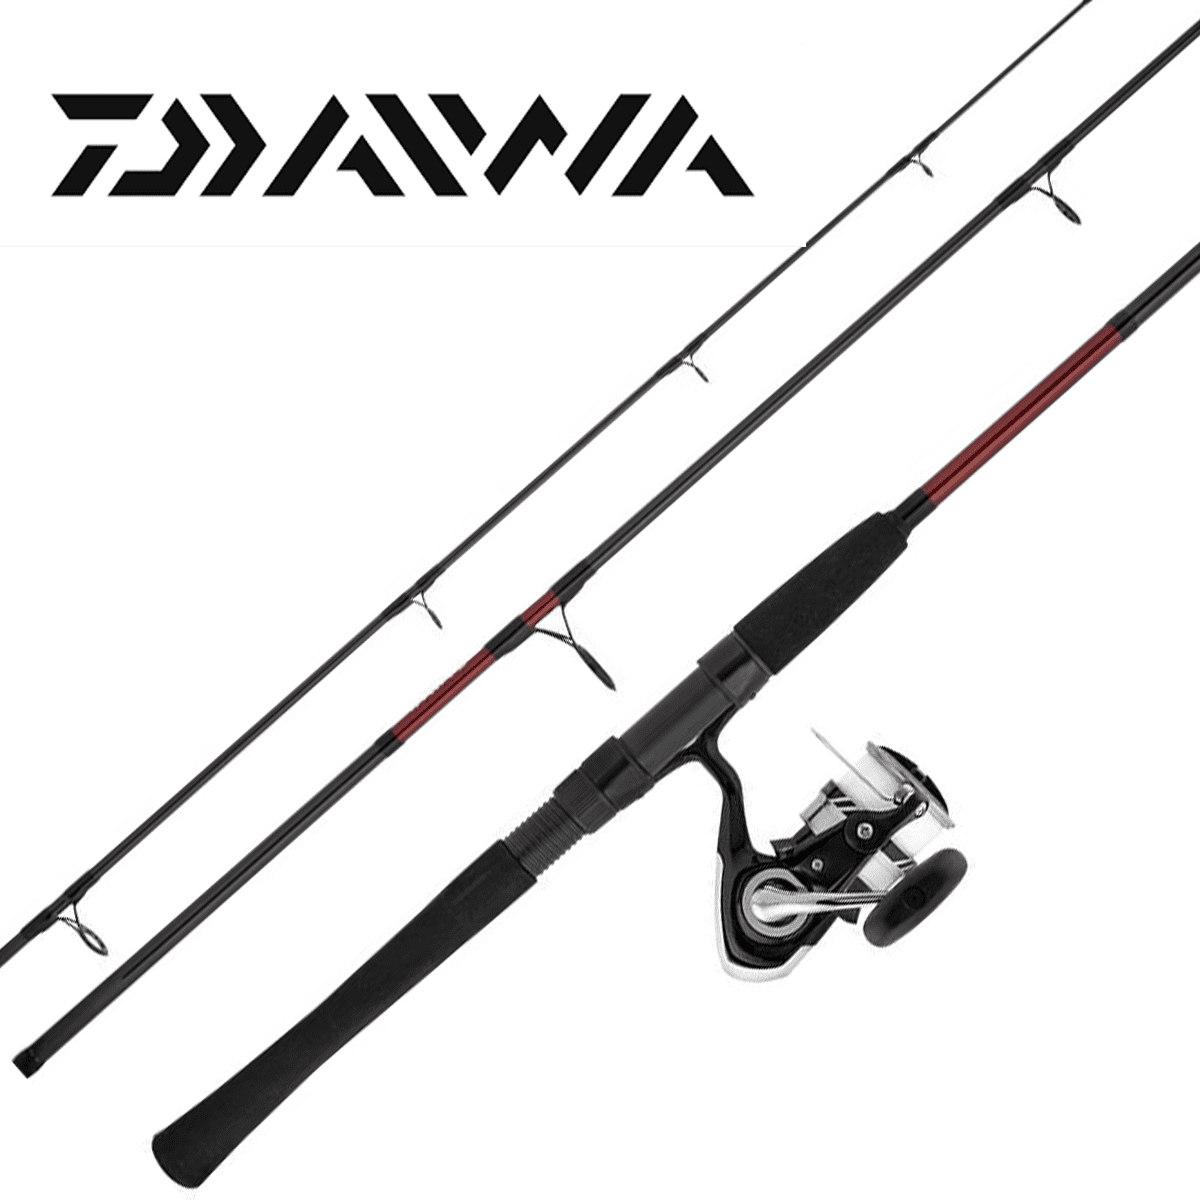 https://oceanswilderness.com.au/wp-content/uploads/2022/05/daiwa-beefstick-702ms-pioneer-cyclone-4000-reel-combo.png